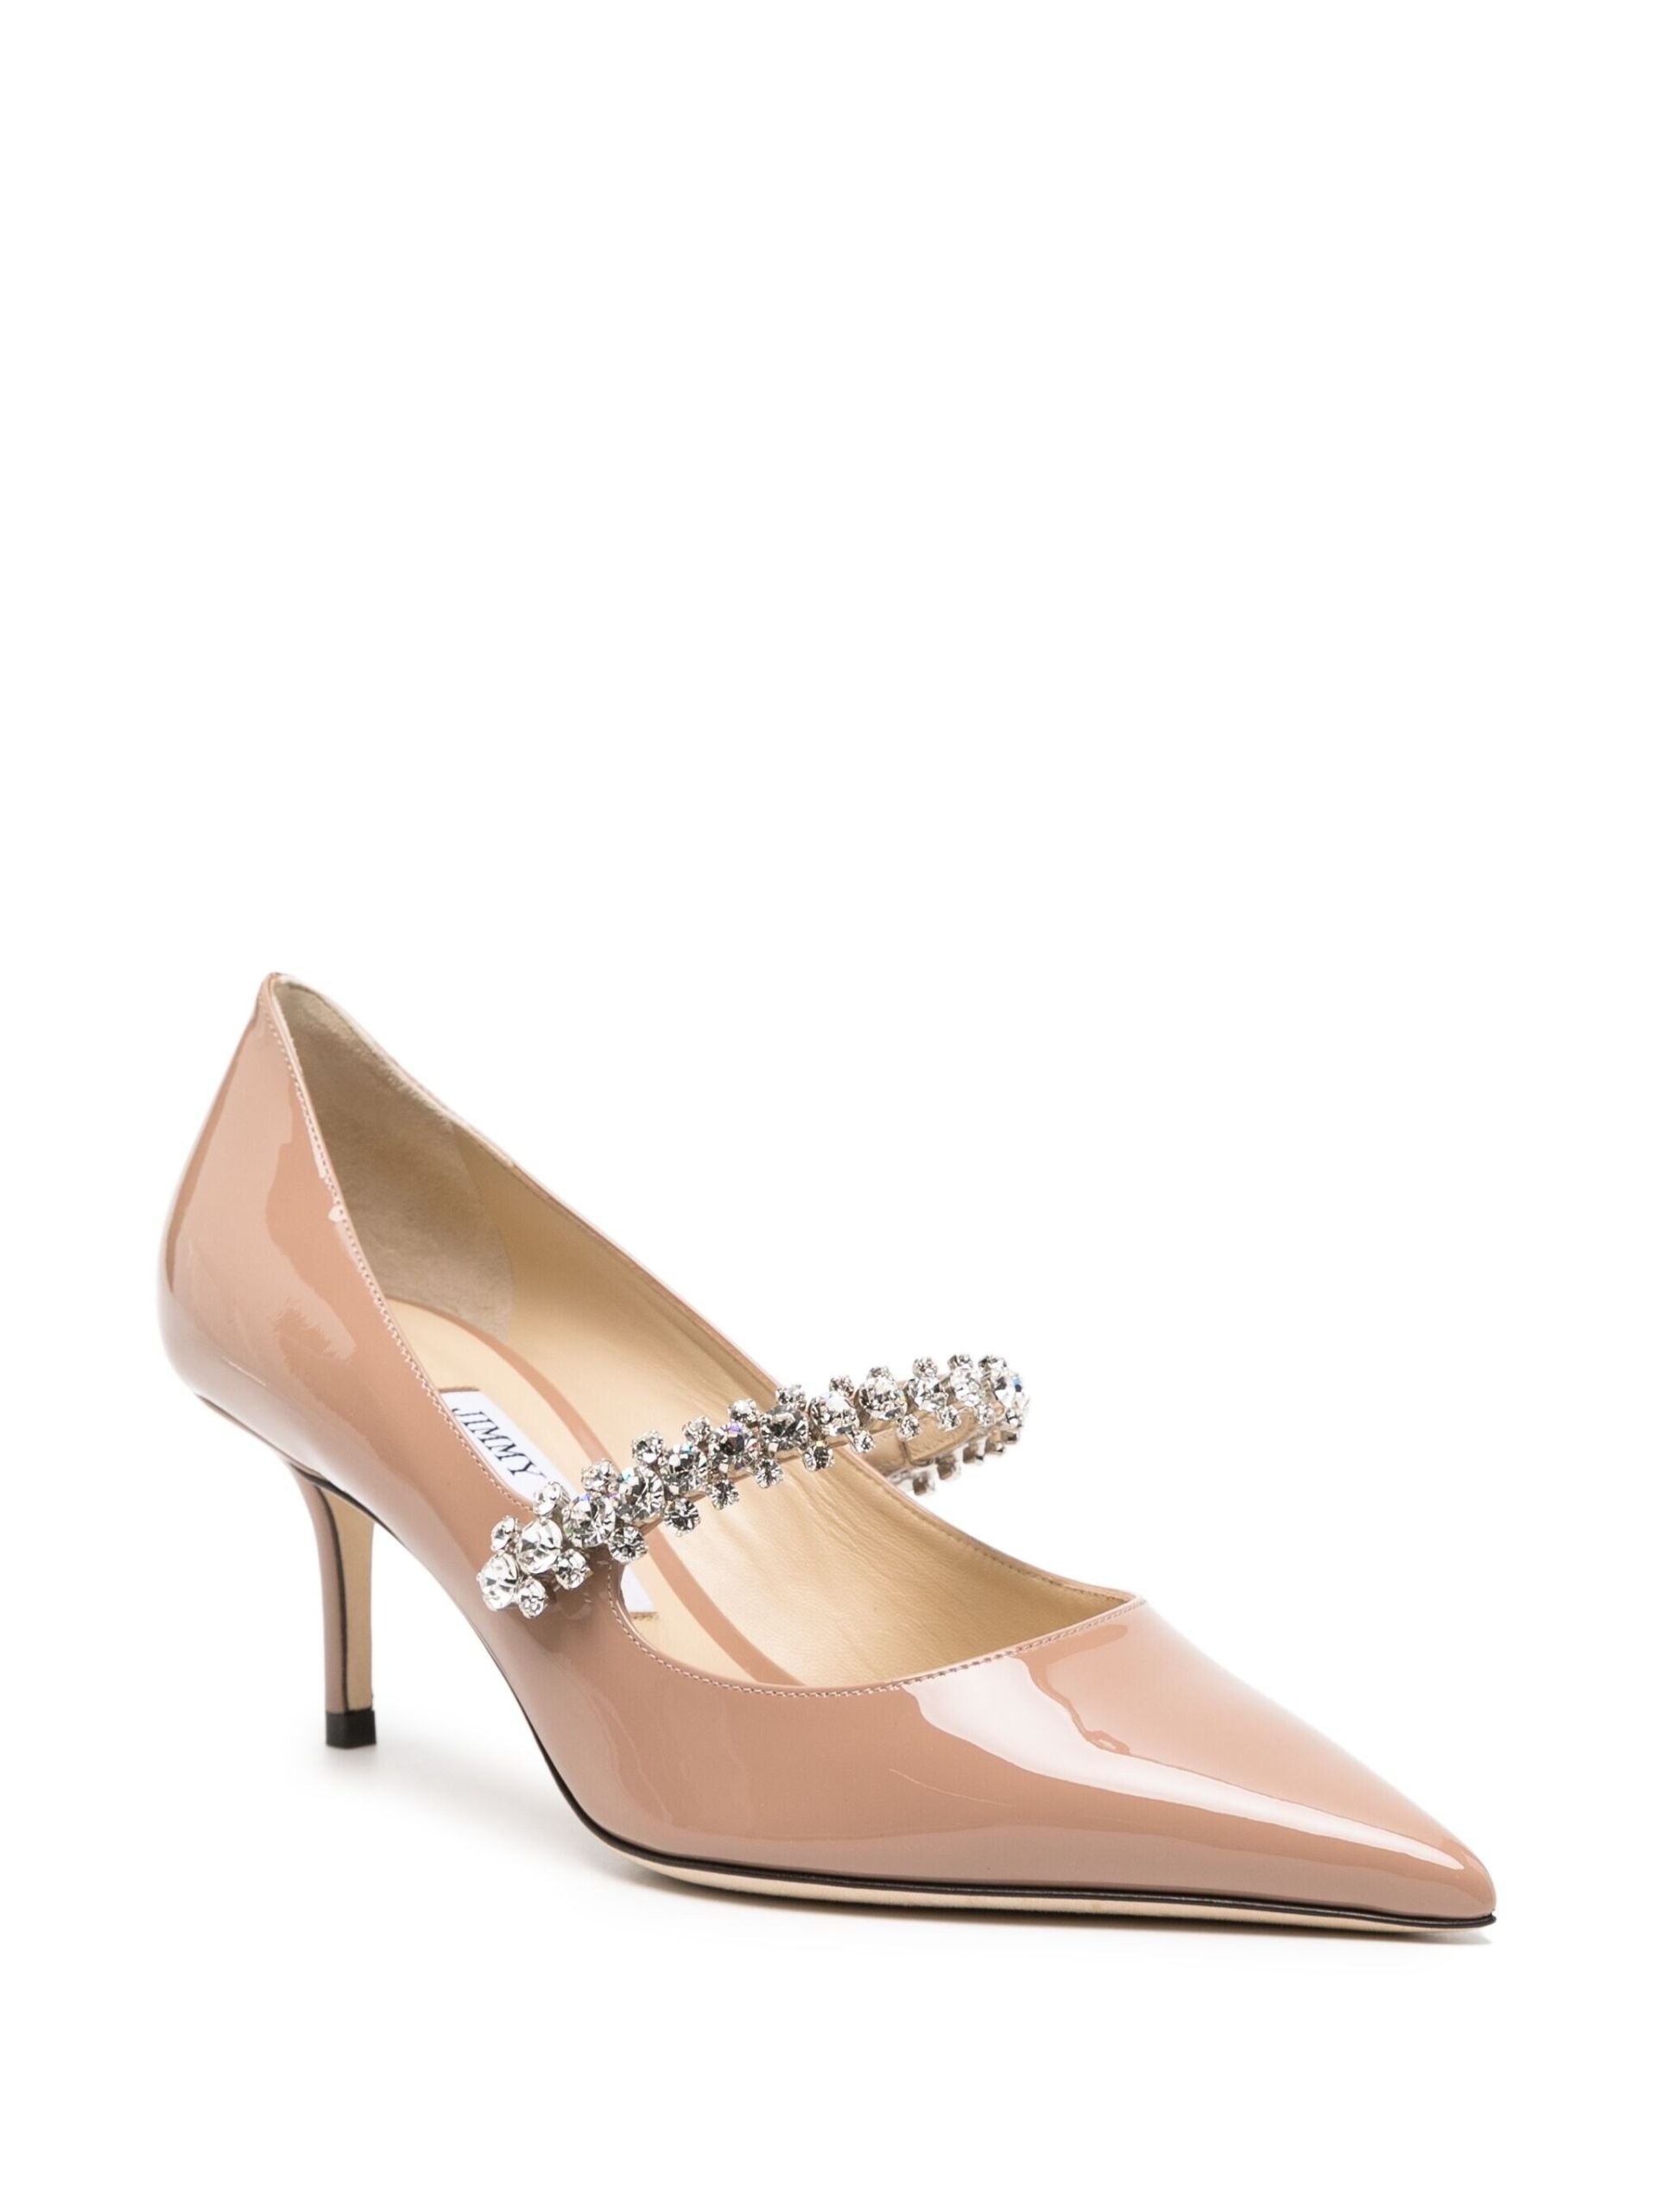 Pink Bing 65 Patent Leather Pumps - 2